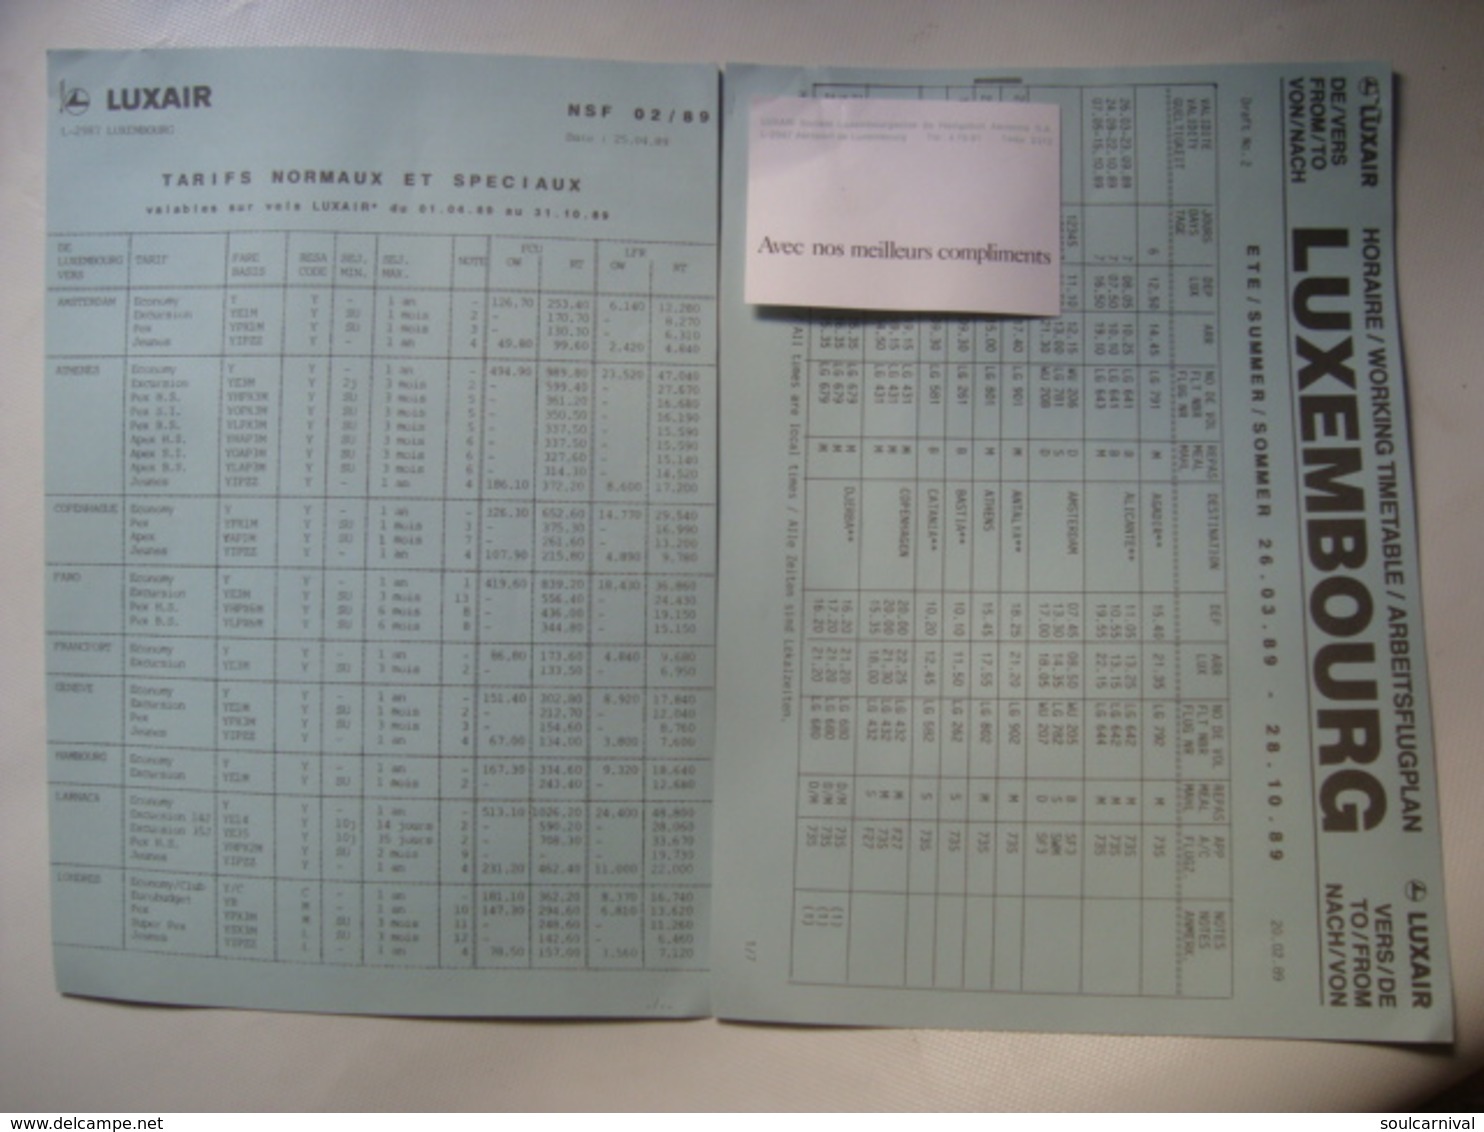 LUXAIR. TARIFS NORMAUX ET SPECIAUX / HORAIRE / WORKING TIMETABLE - LUXEMBOURG, 1989. - Horaires